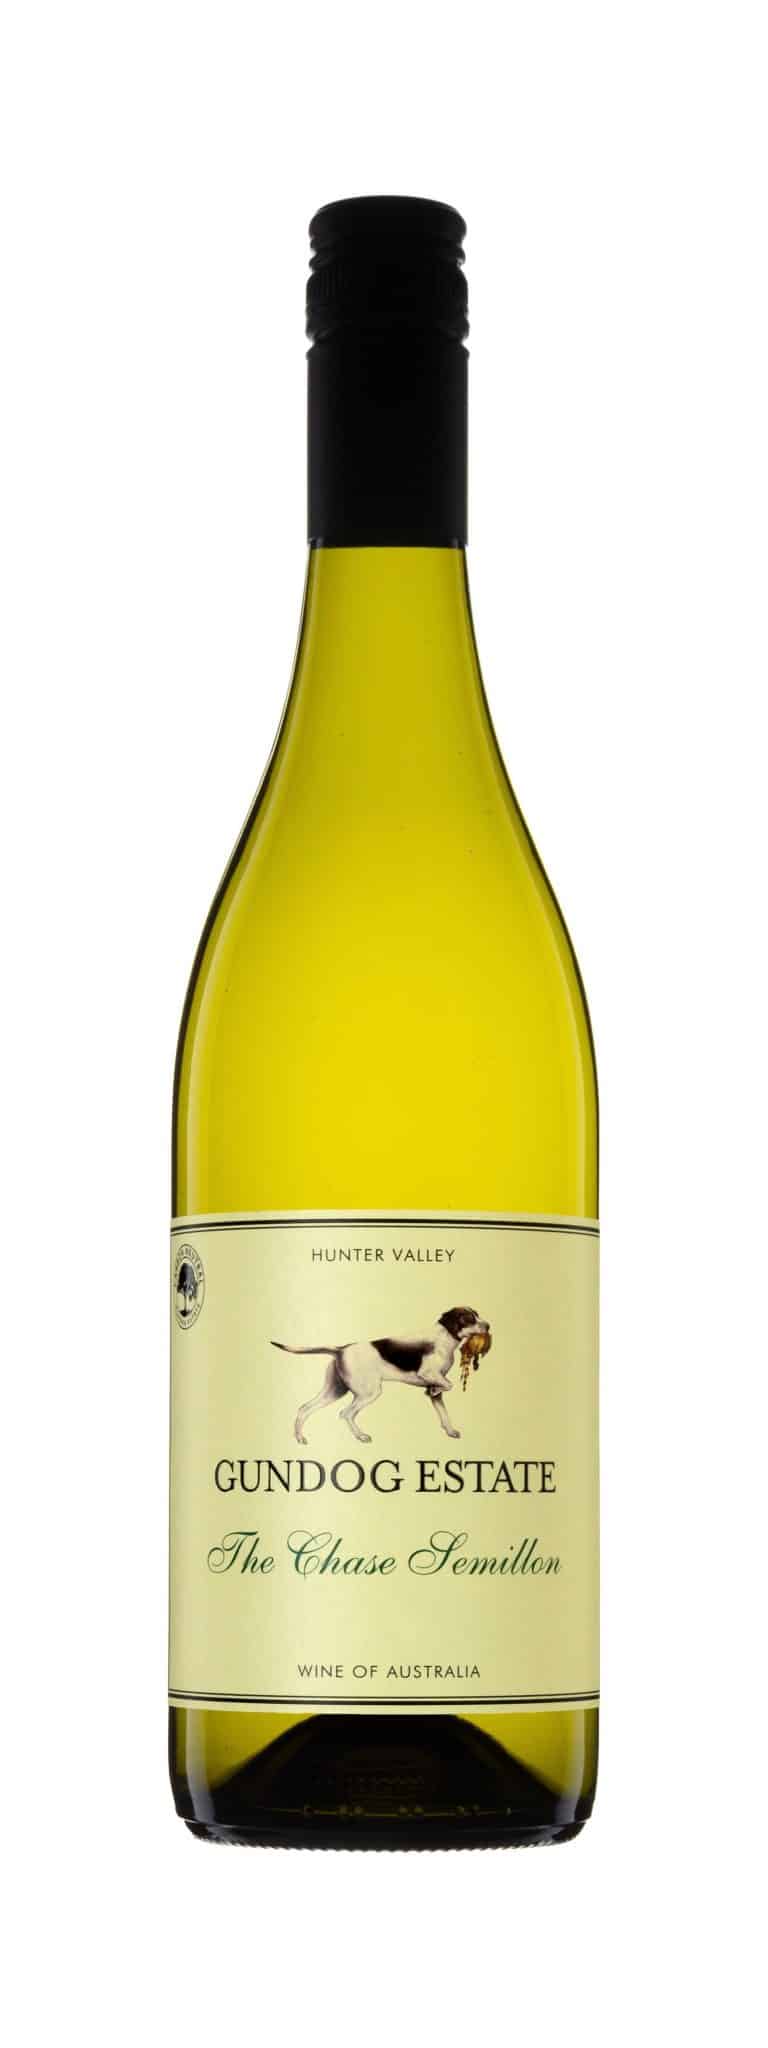 The Chase Semillon